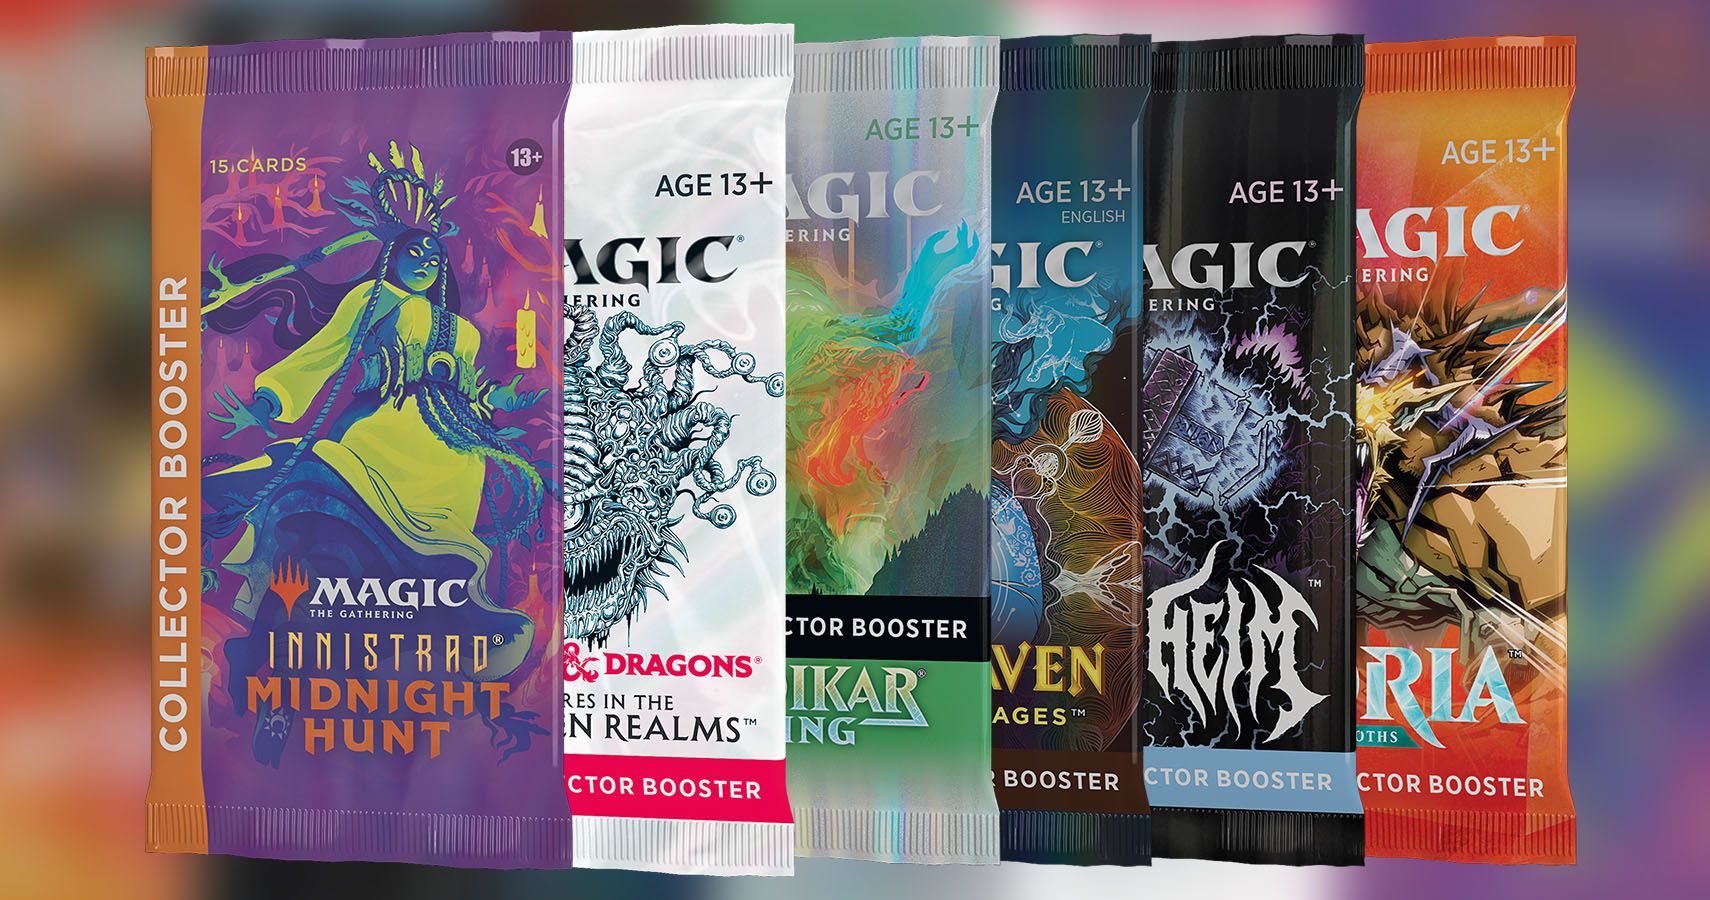 Magic The Gathering Booster Packs Guide Draft Set Theme And Collectors Booster Packs Explained